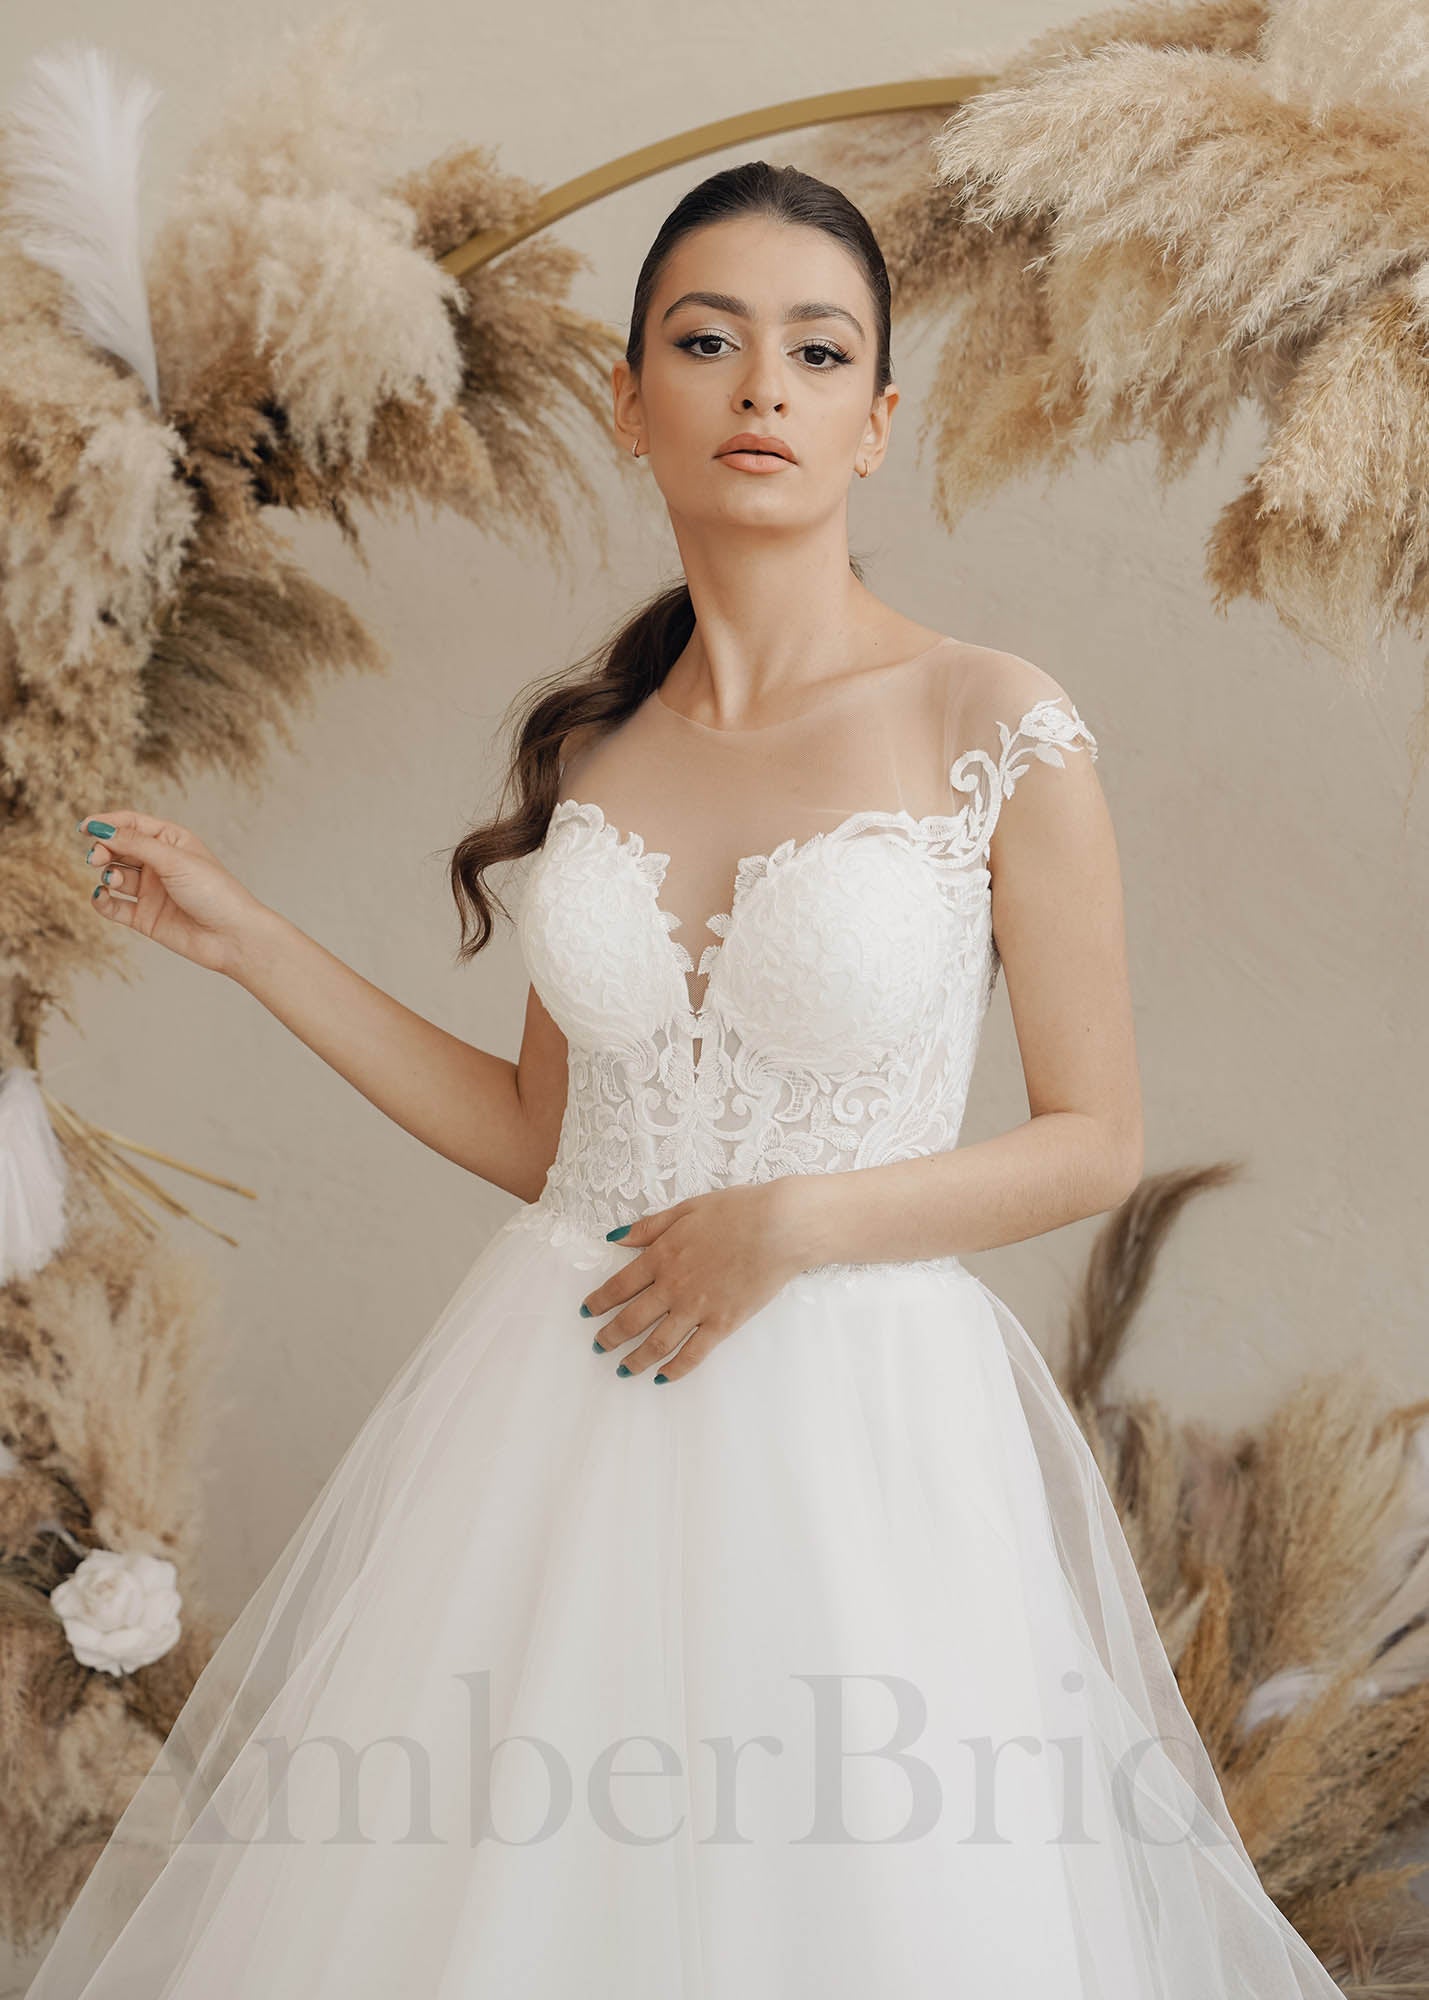 Boho A-Line Tulle Wedding Dress with Floral and Illusion Design